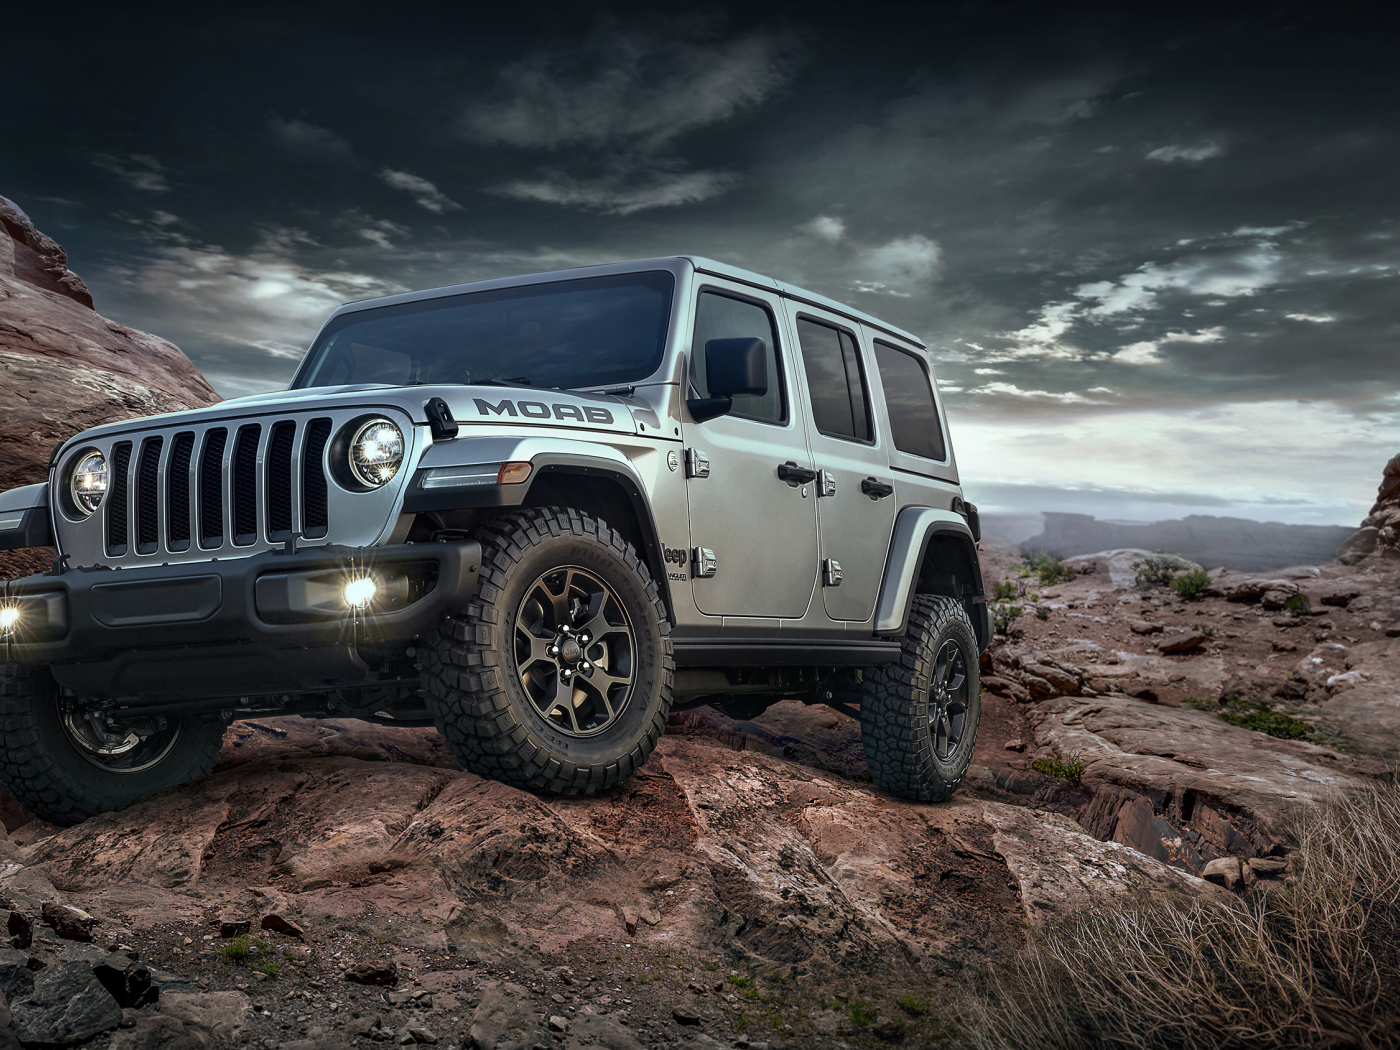 Jeep Wrangler SUV 2018 in the mountains